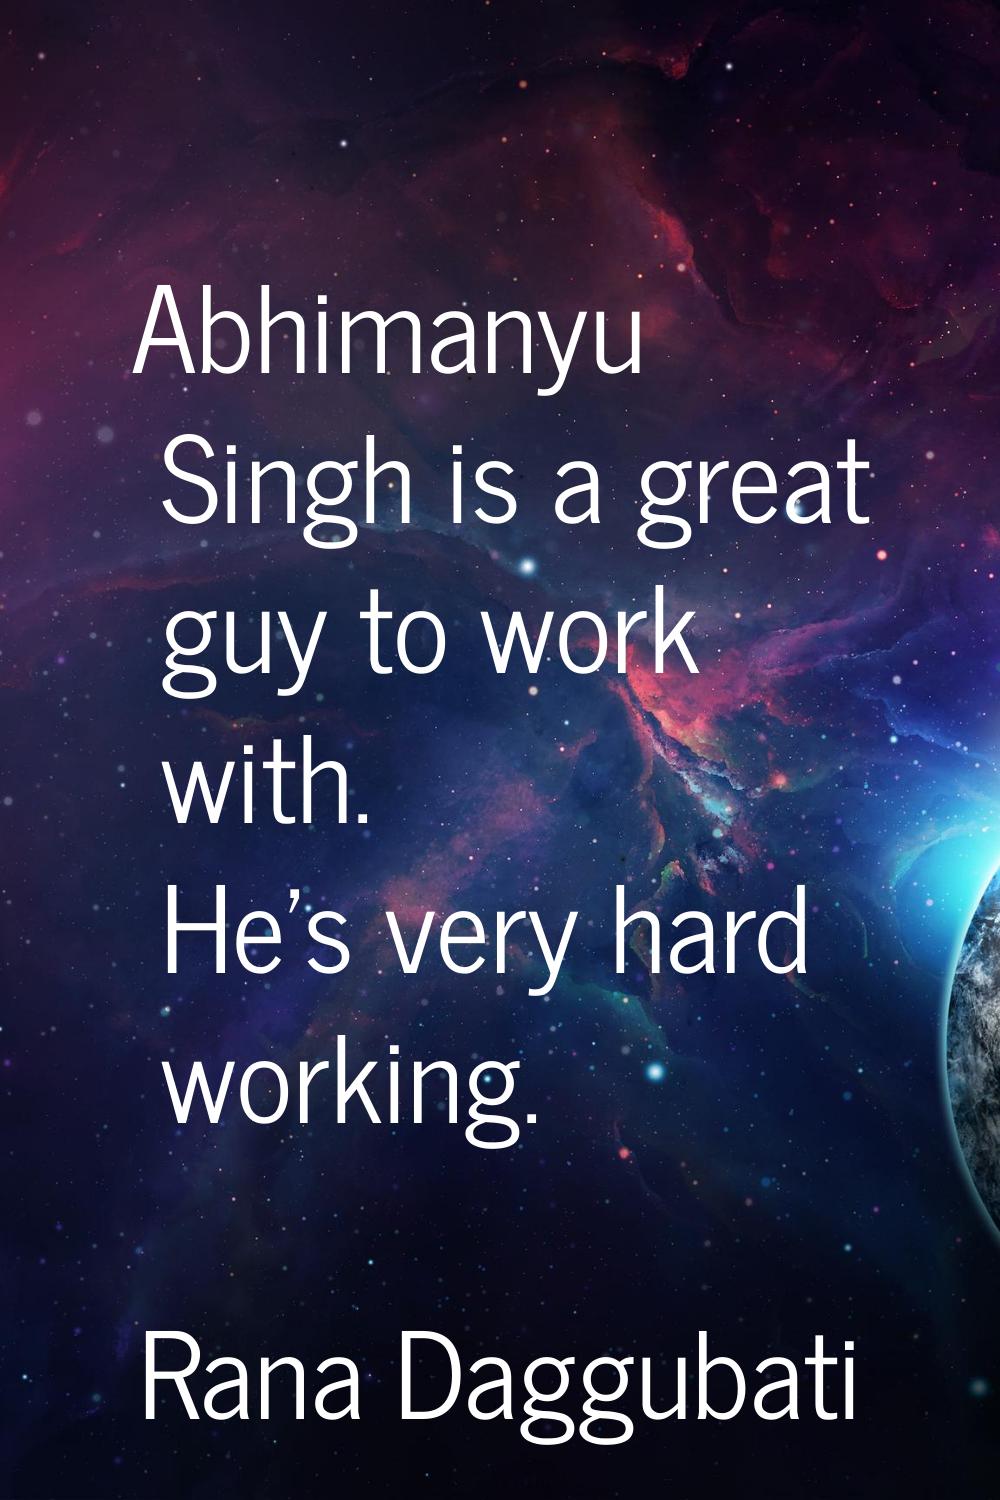 Abhimanyu Singh is a great guy to work with. He's very hard working.